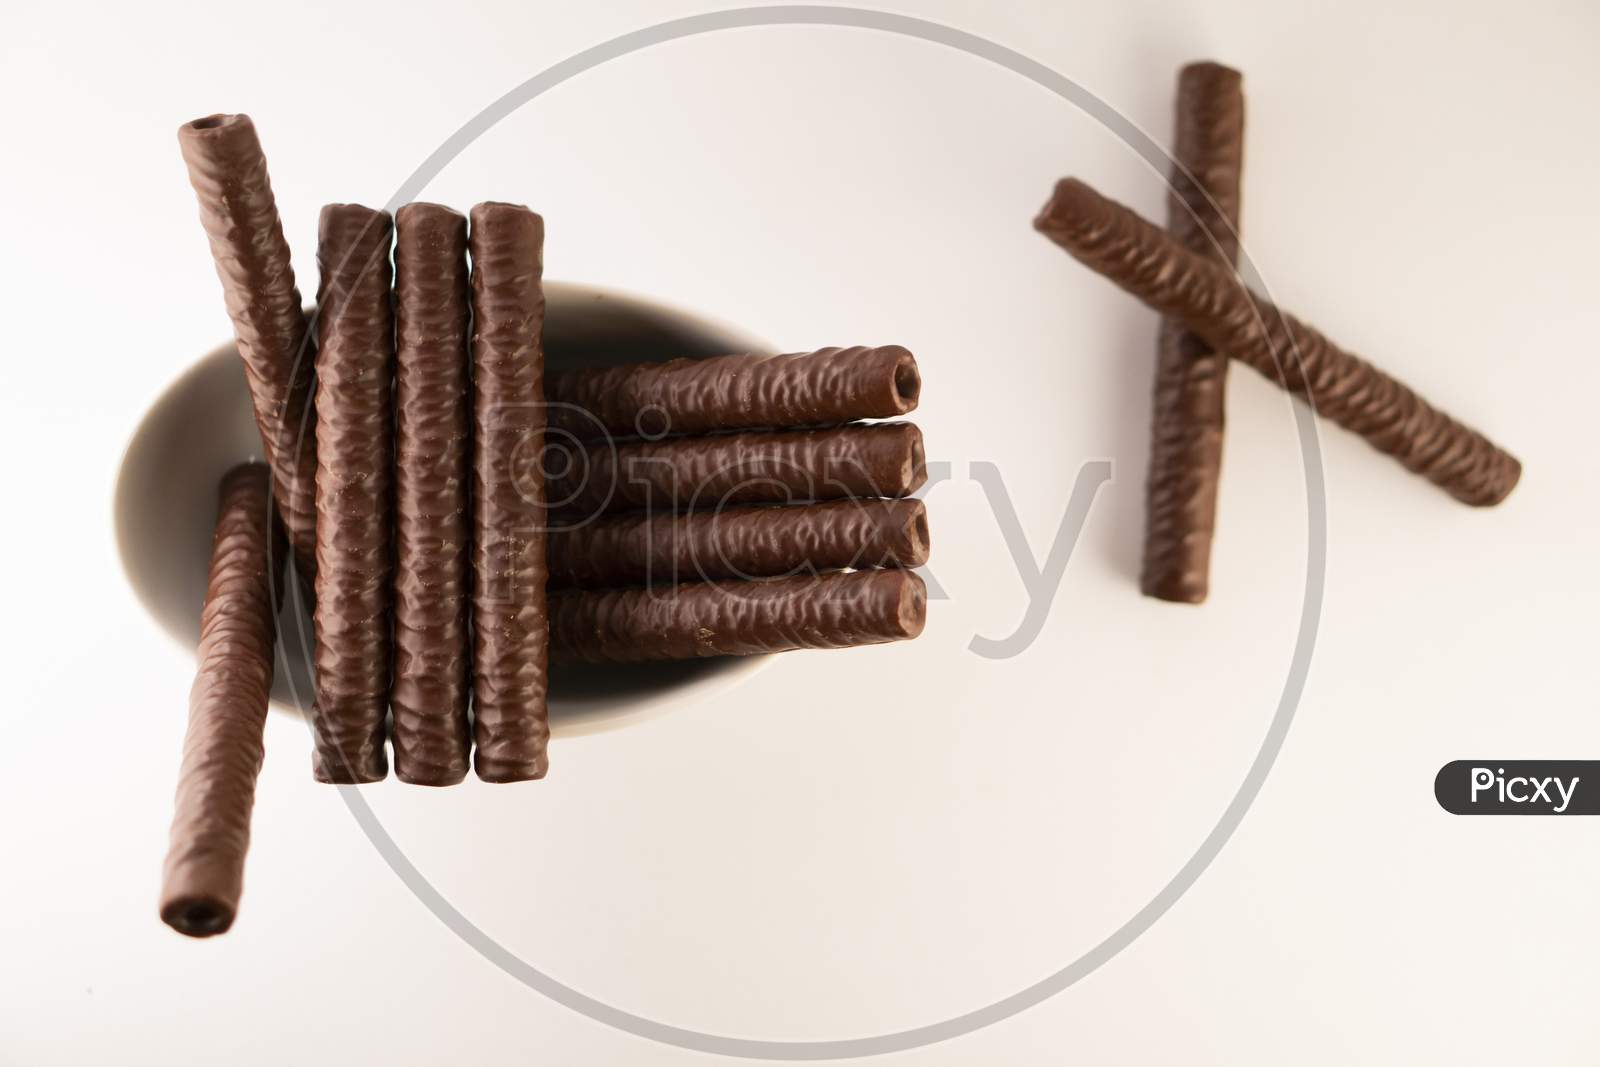 chocolate sticks in a bowl on a white background.